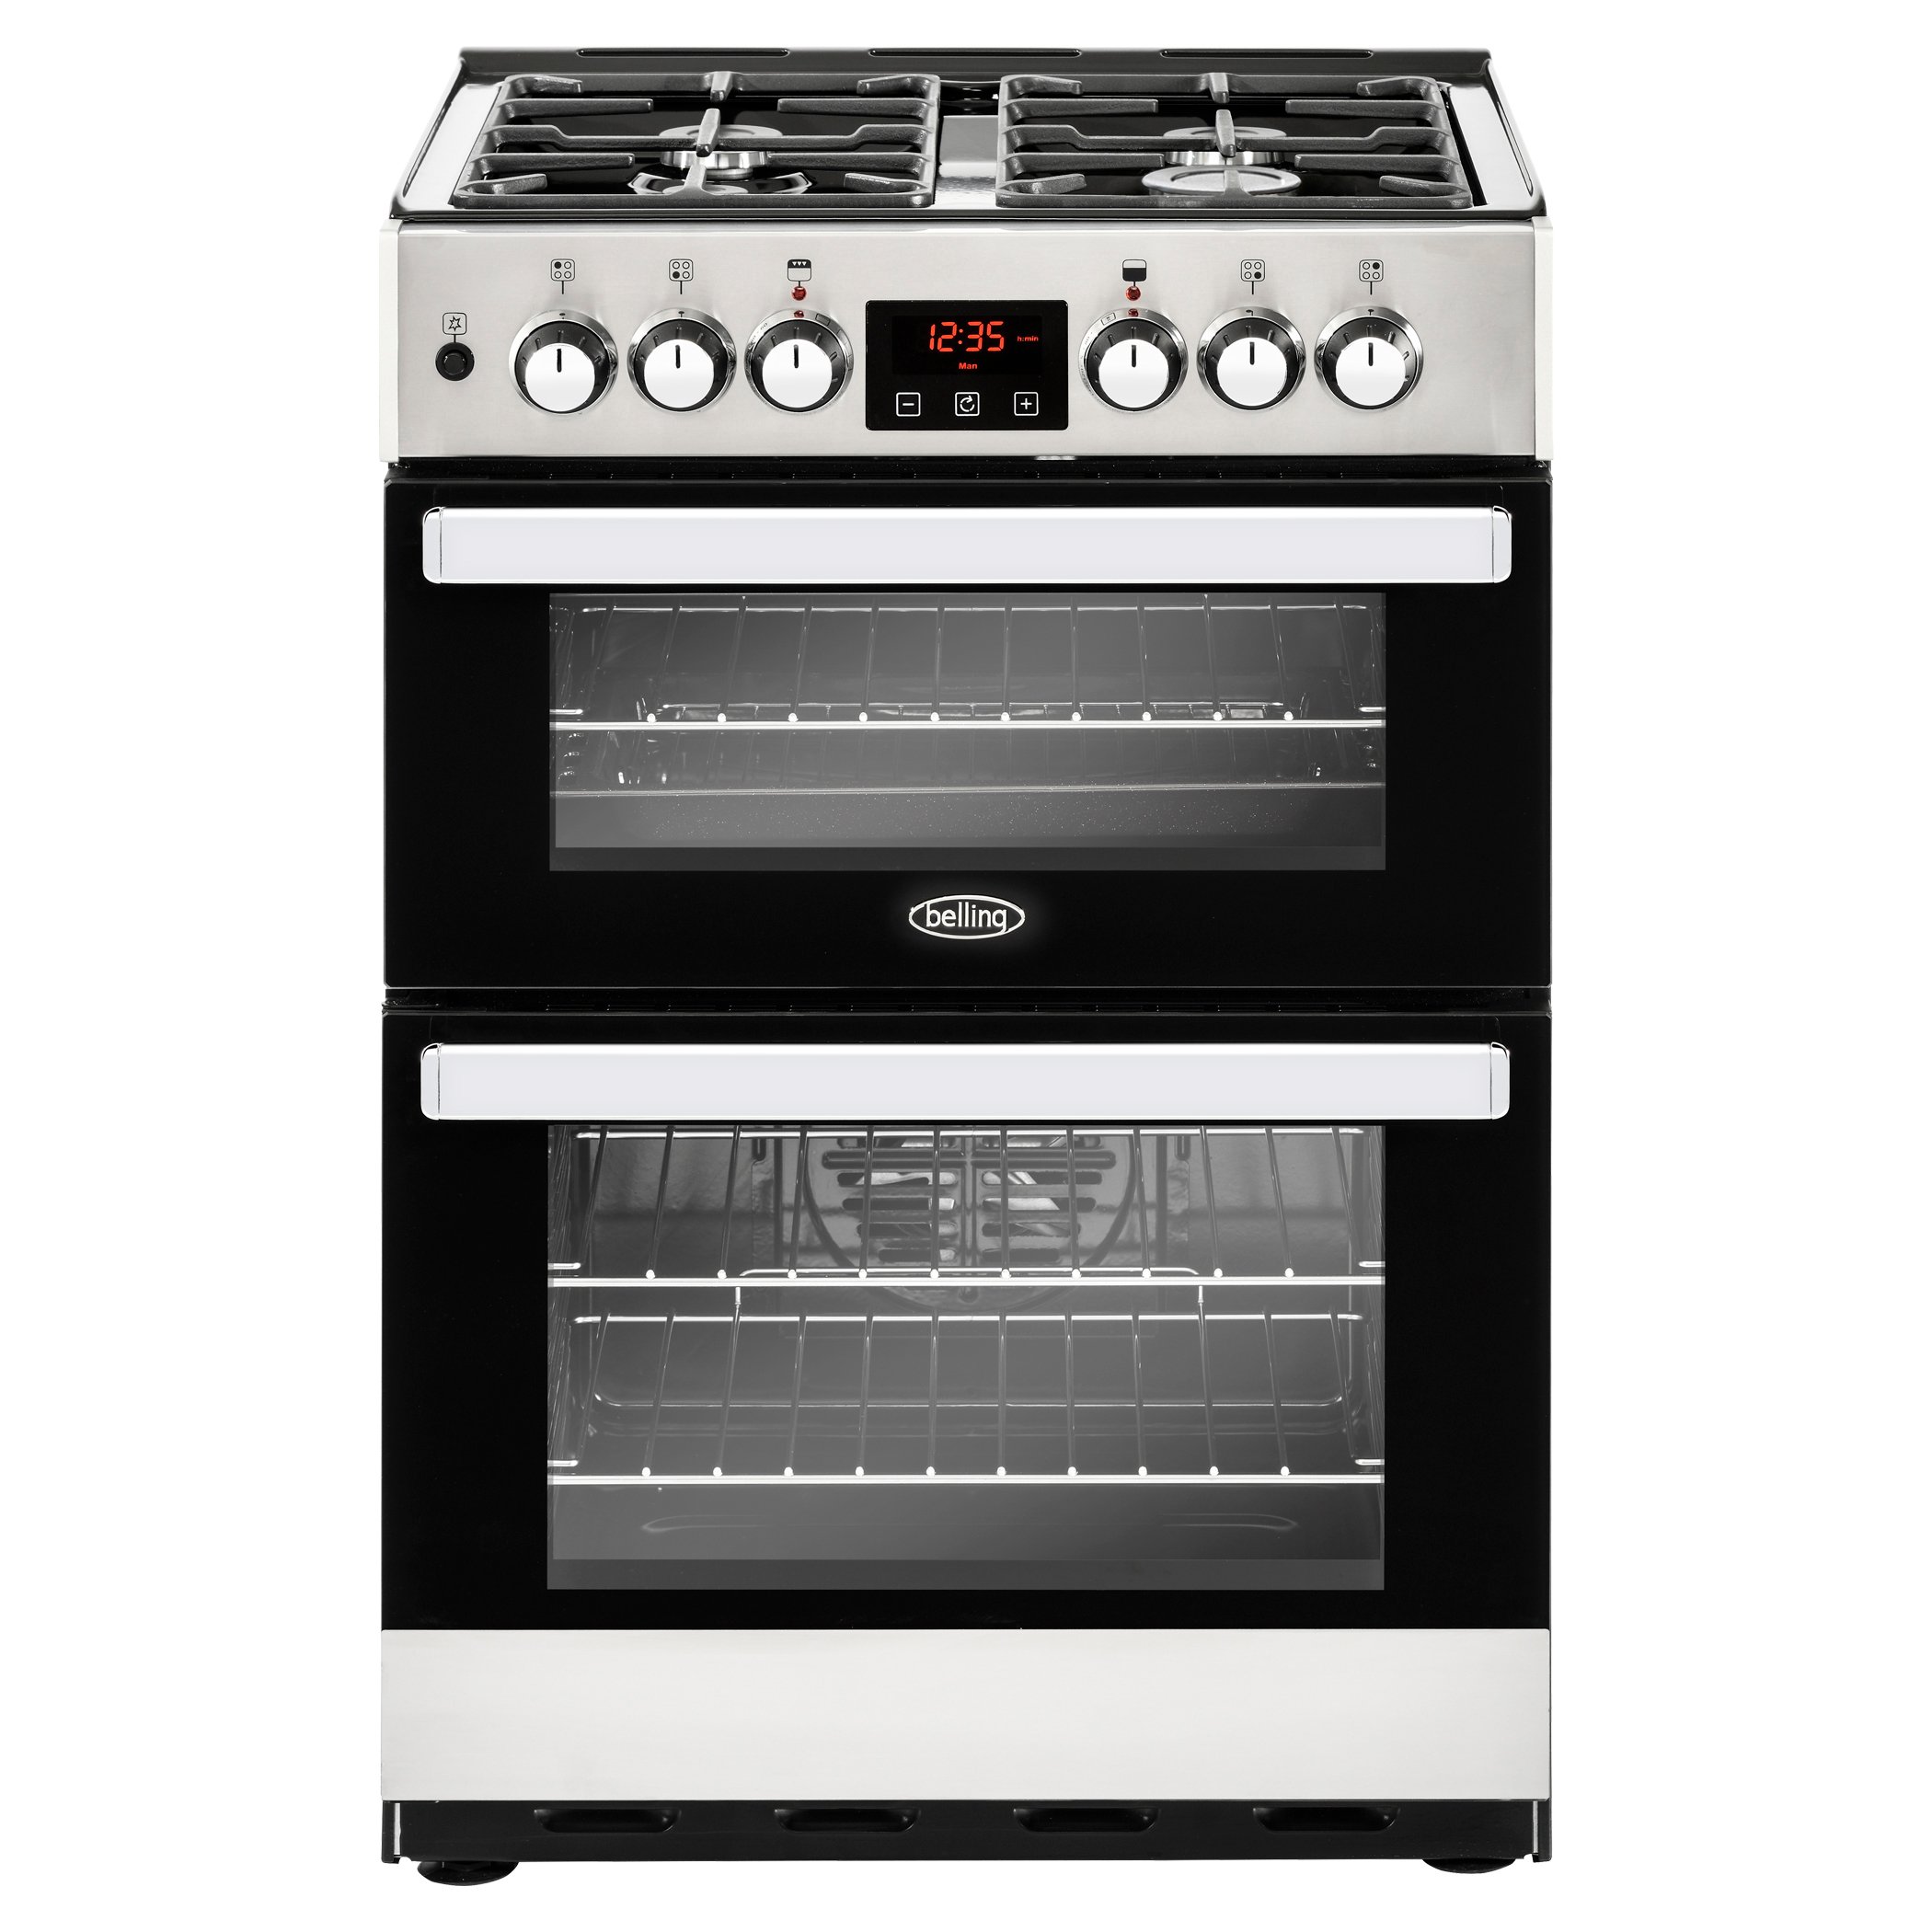 60cm Dual Fuel Range Cooker With A 4 Burner Gas Hob, Conventional Oven & Grill and Fanned Main Oven